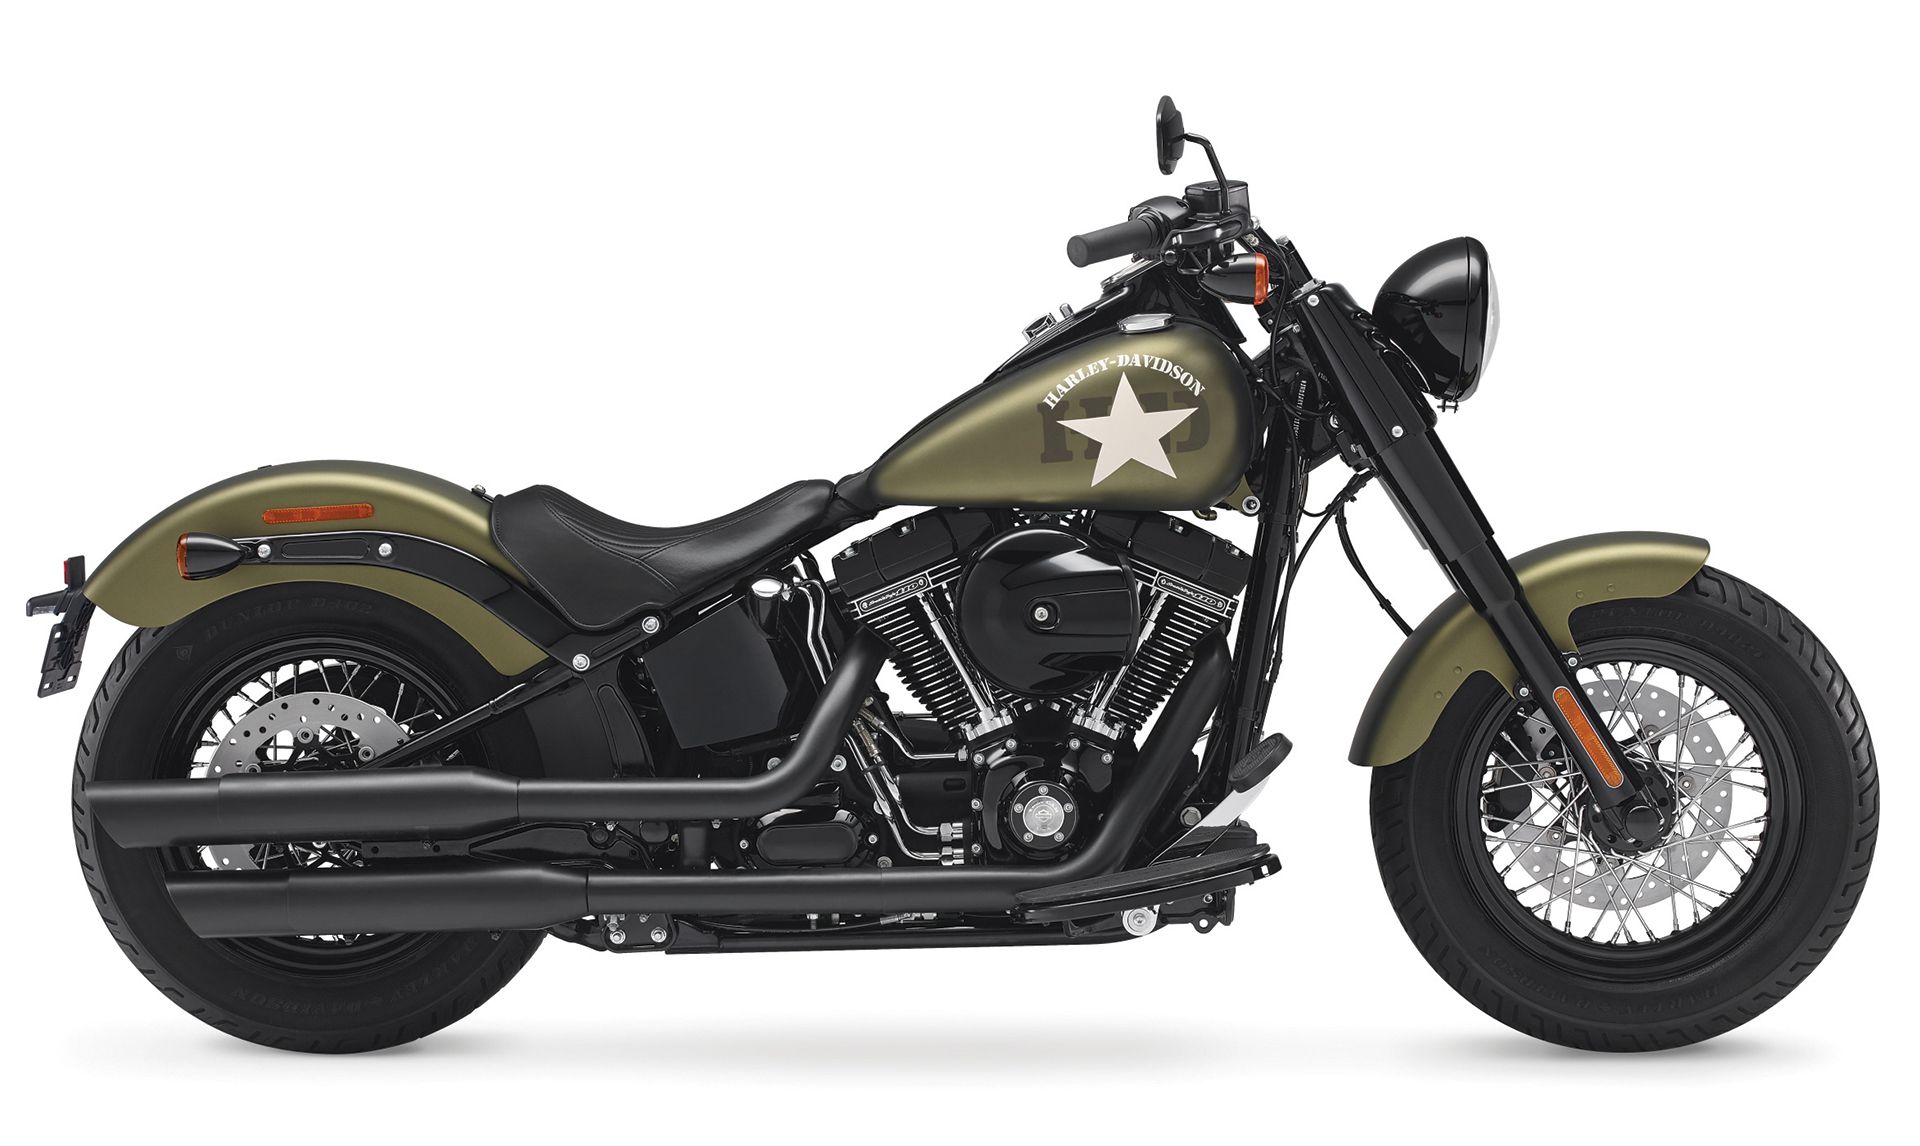 Harley Softail Slim S Vs Indian Chief Vs Victory Gunner Comparison Test Cycle World